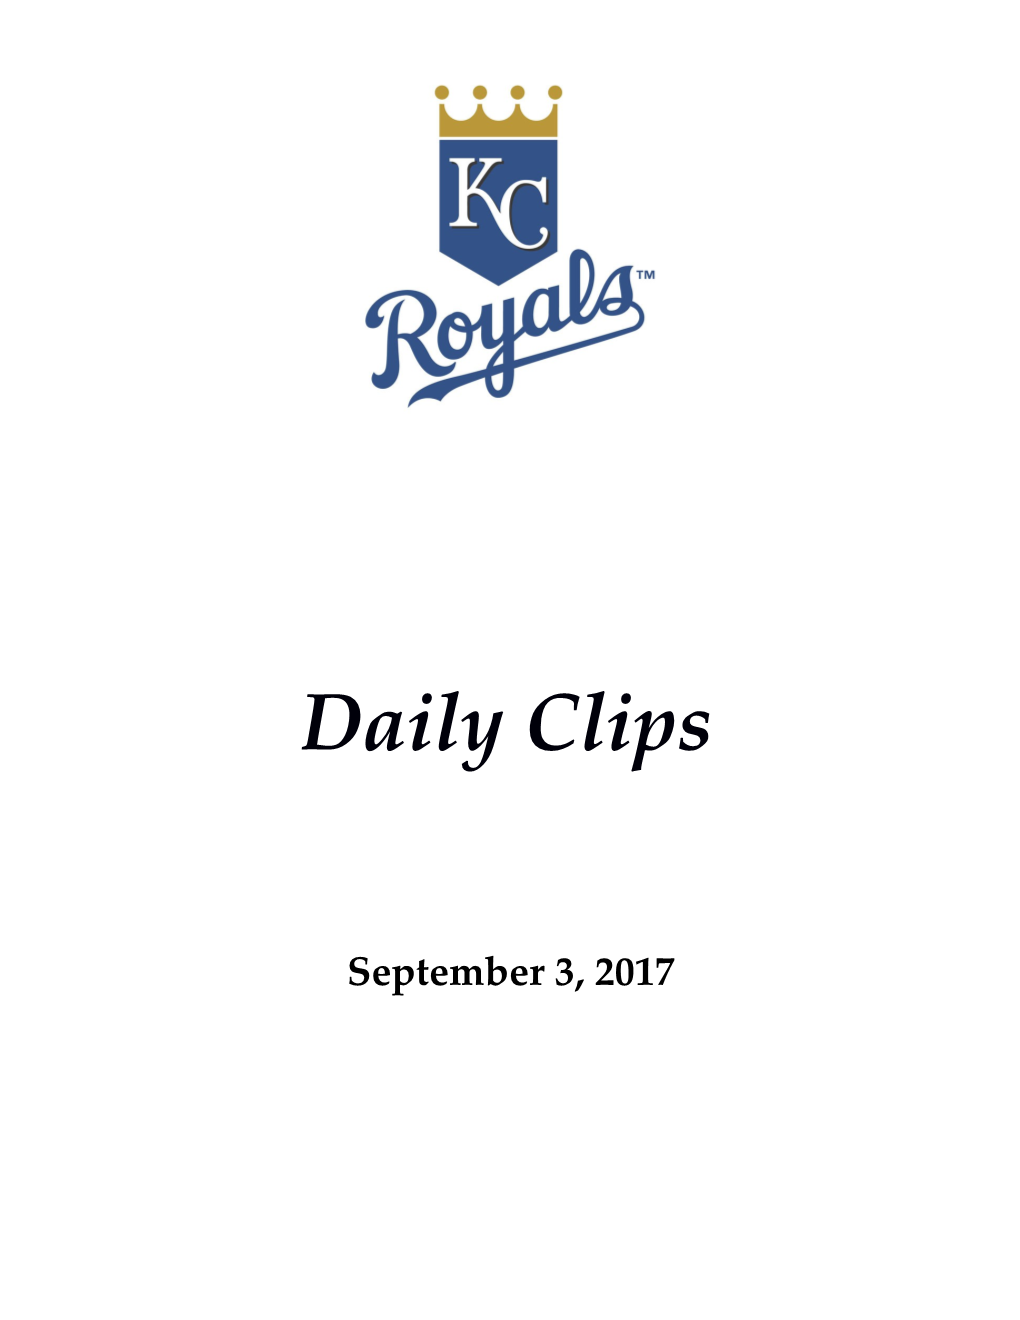 Royals Rocked Early, Slip in Wild Card Chase